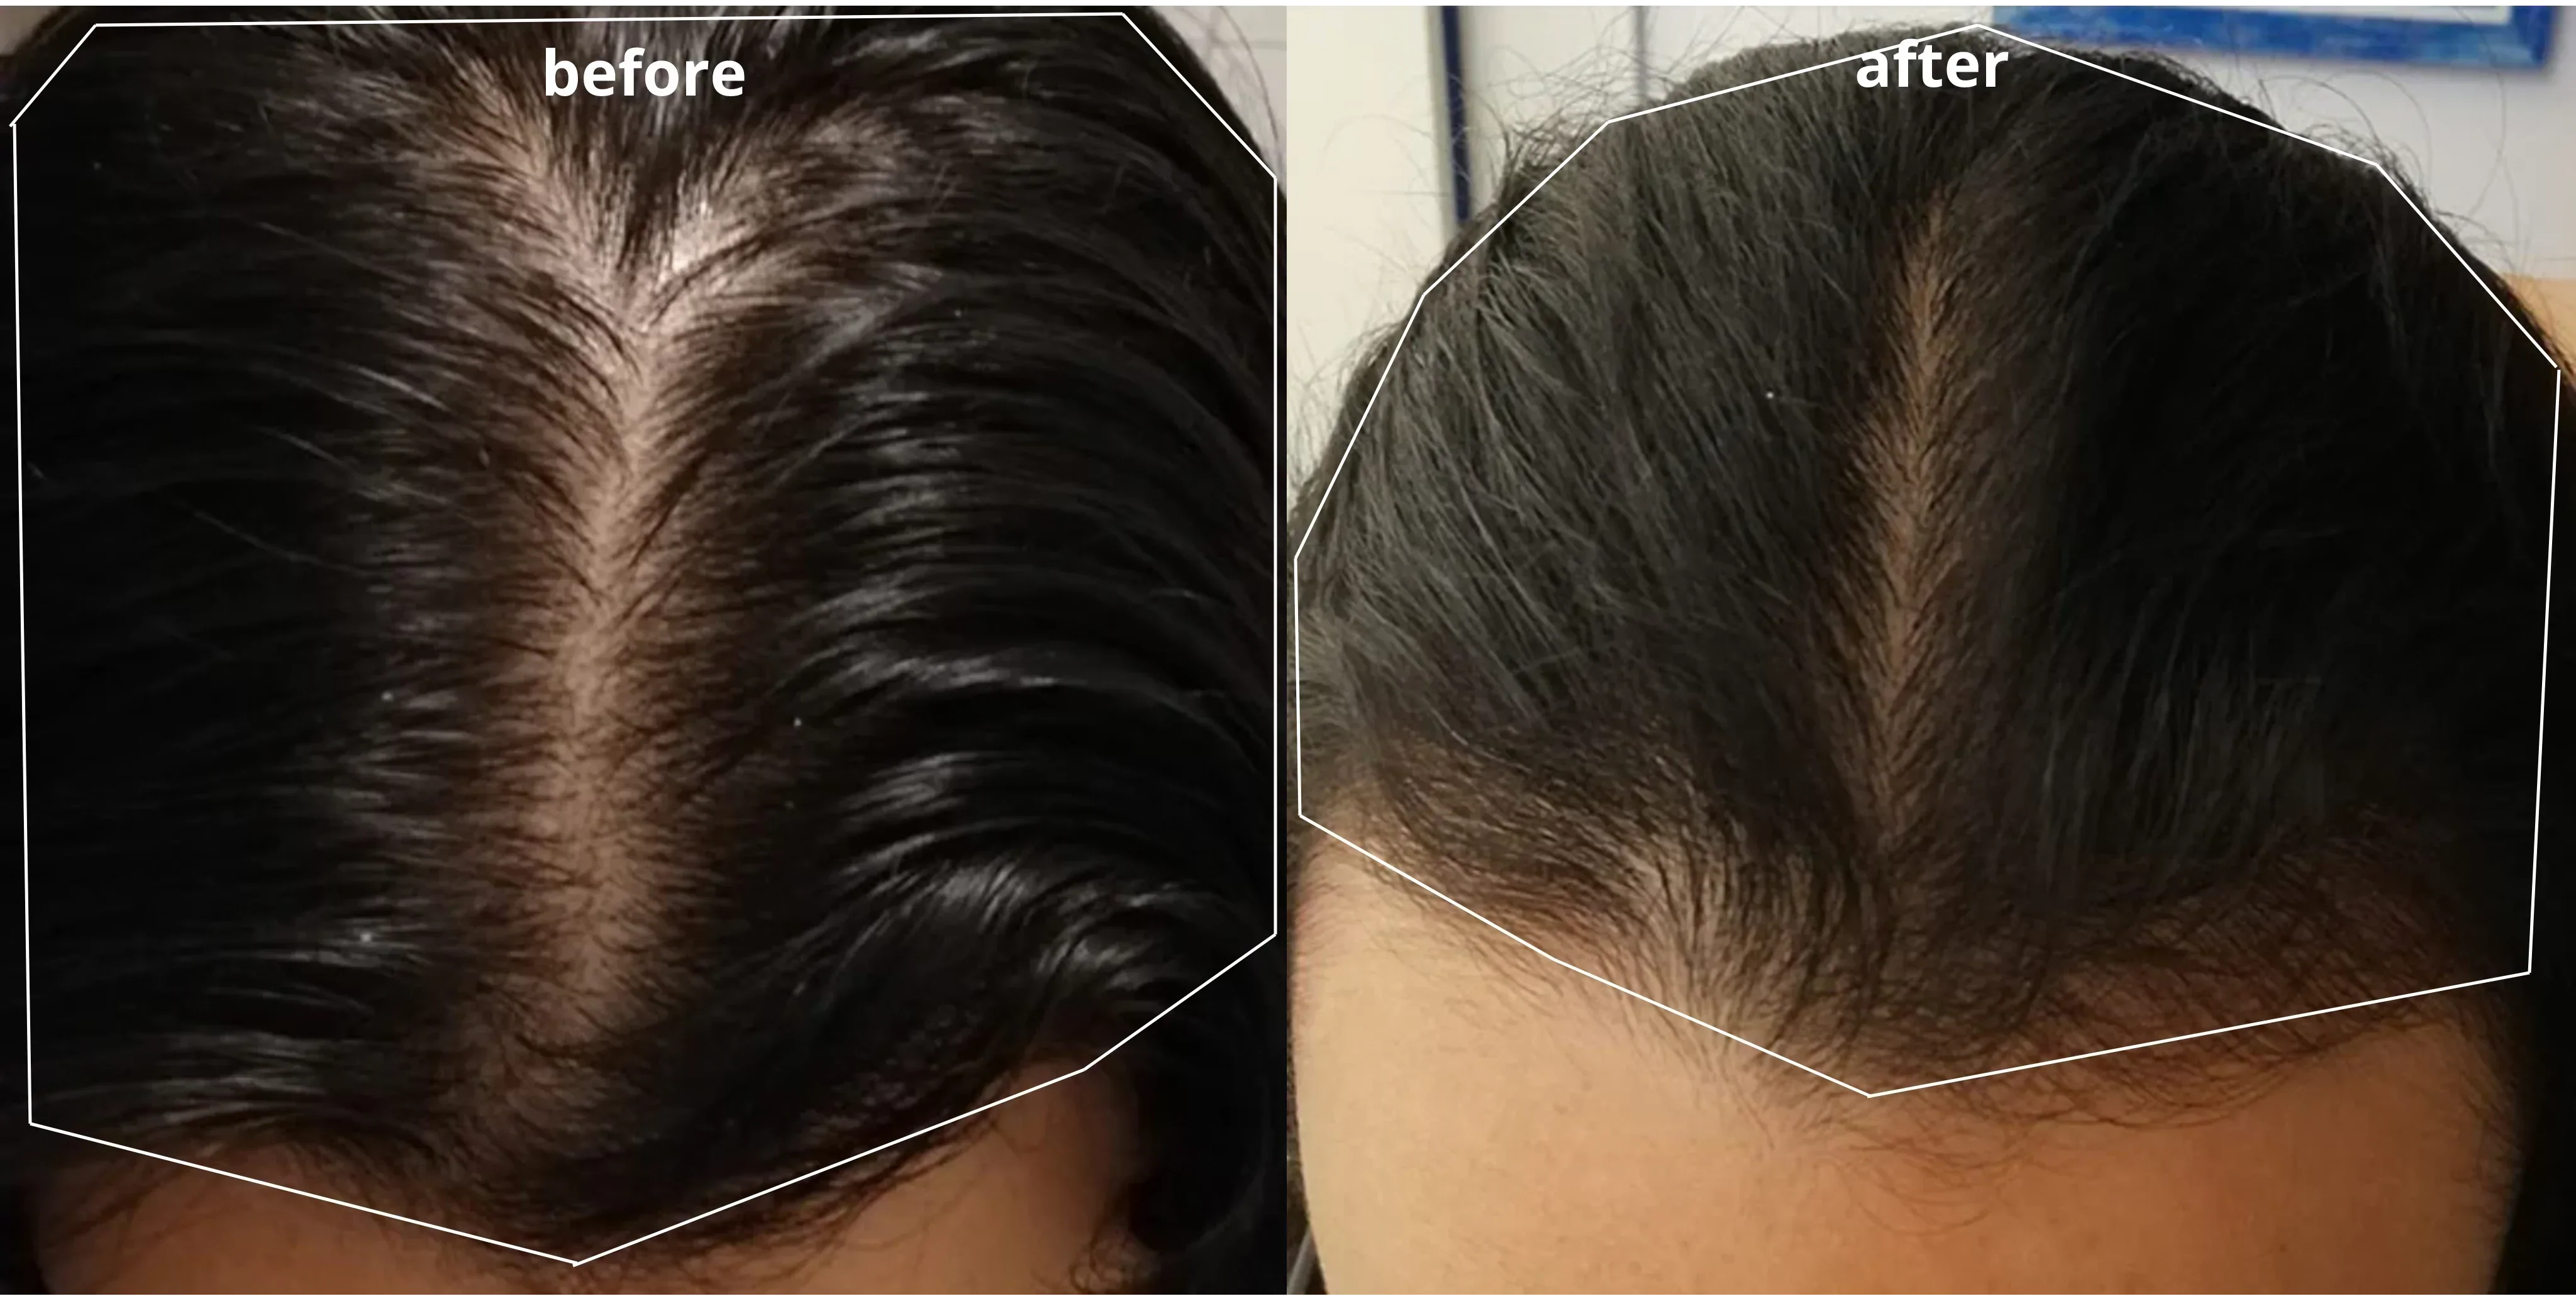 Low carb diet hair loss treatment